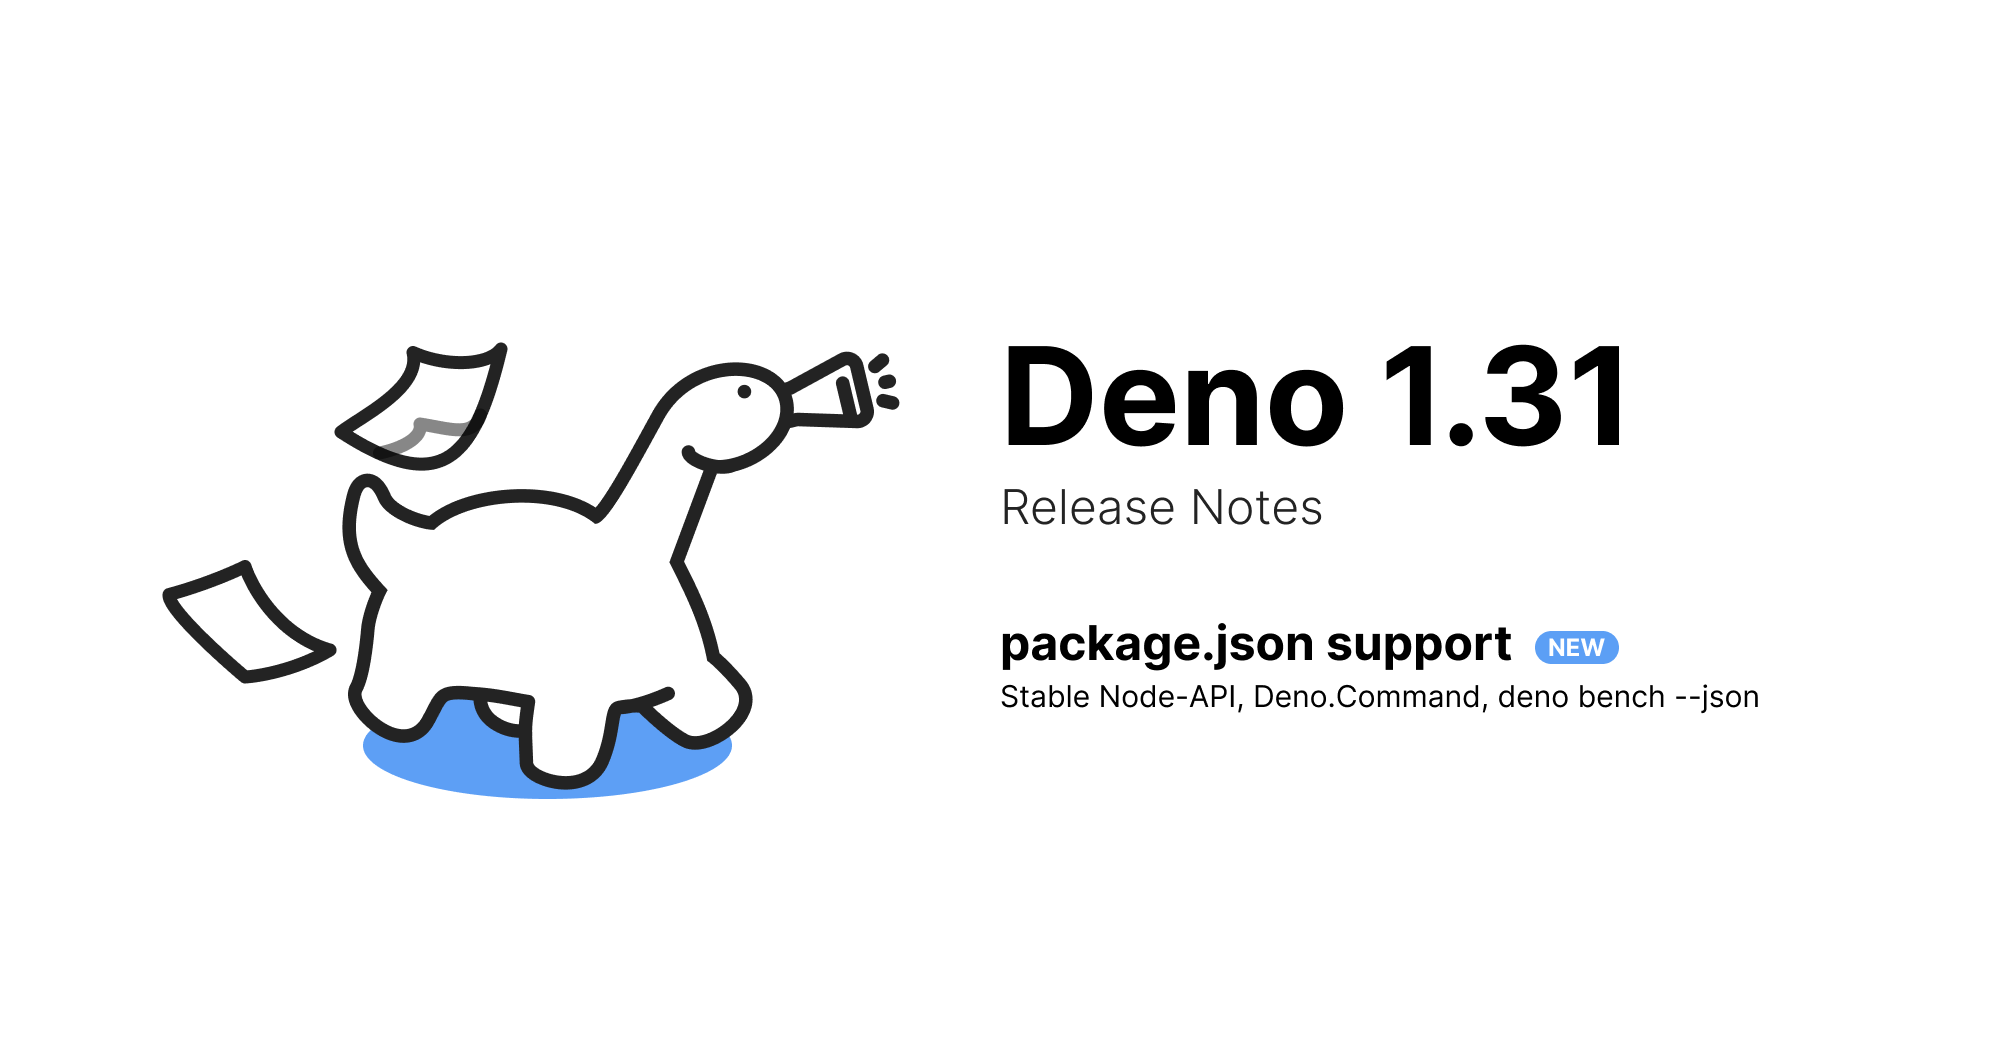 Deno 1.31: package.json support